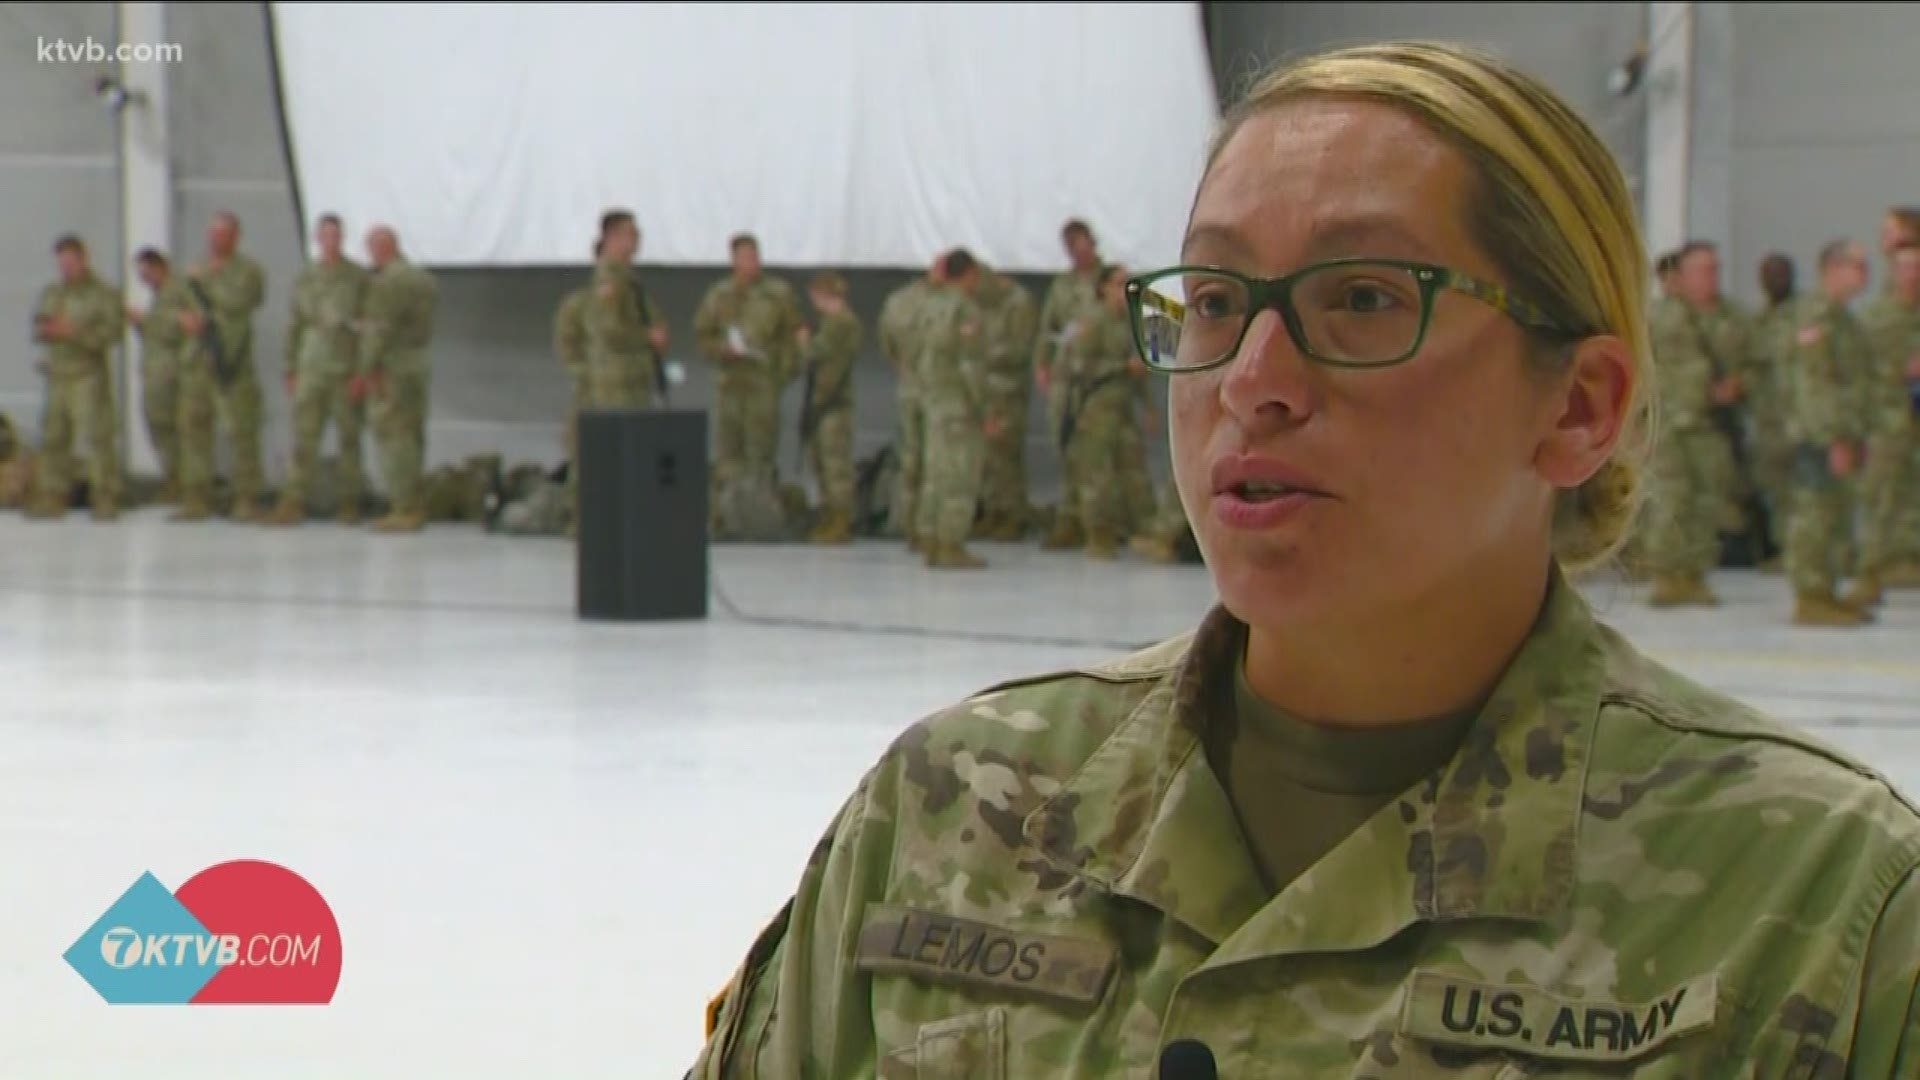 "I'm not sure what to expect, I'm not sure how we will be greeted, but at the end of the day, national guard members are community members themselves."